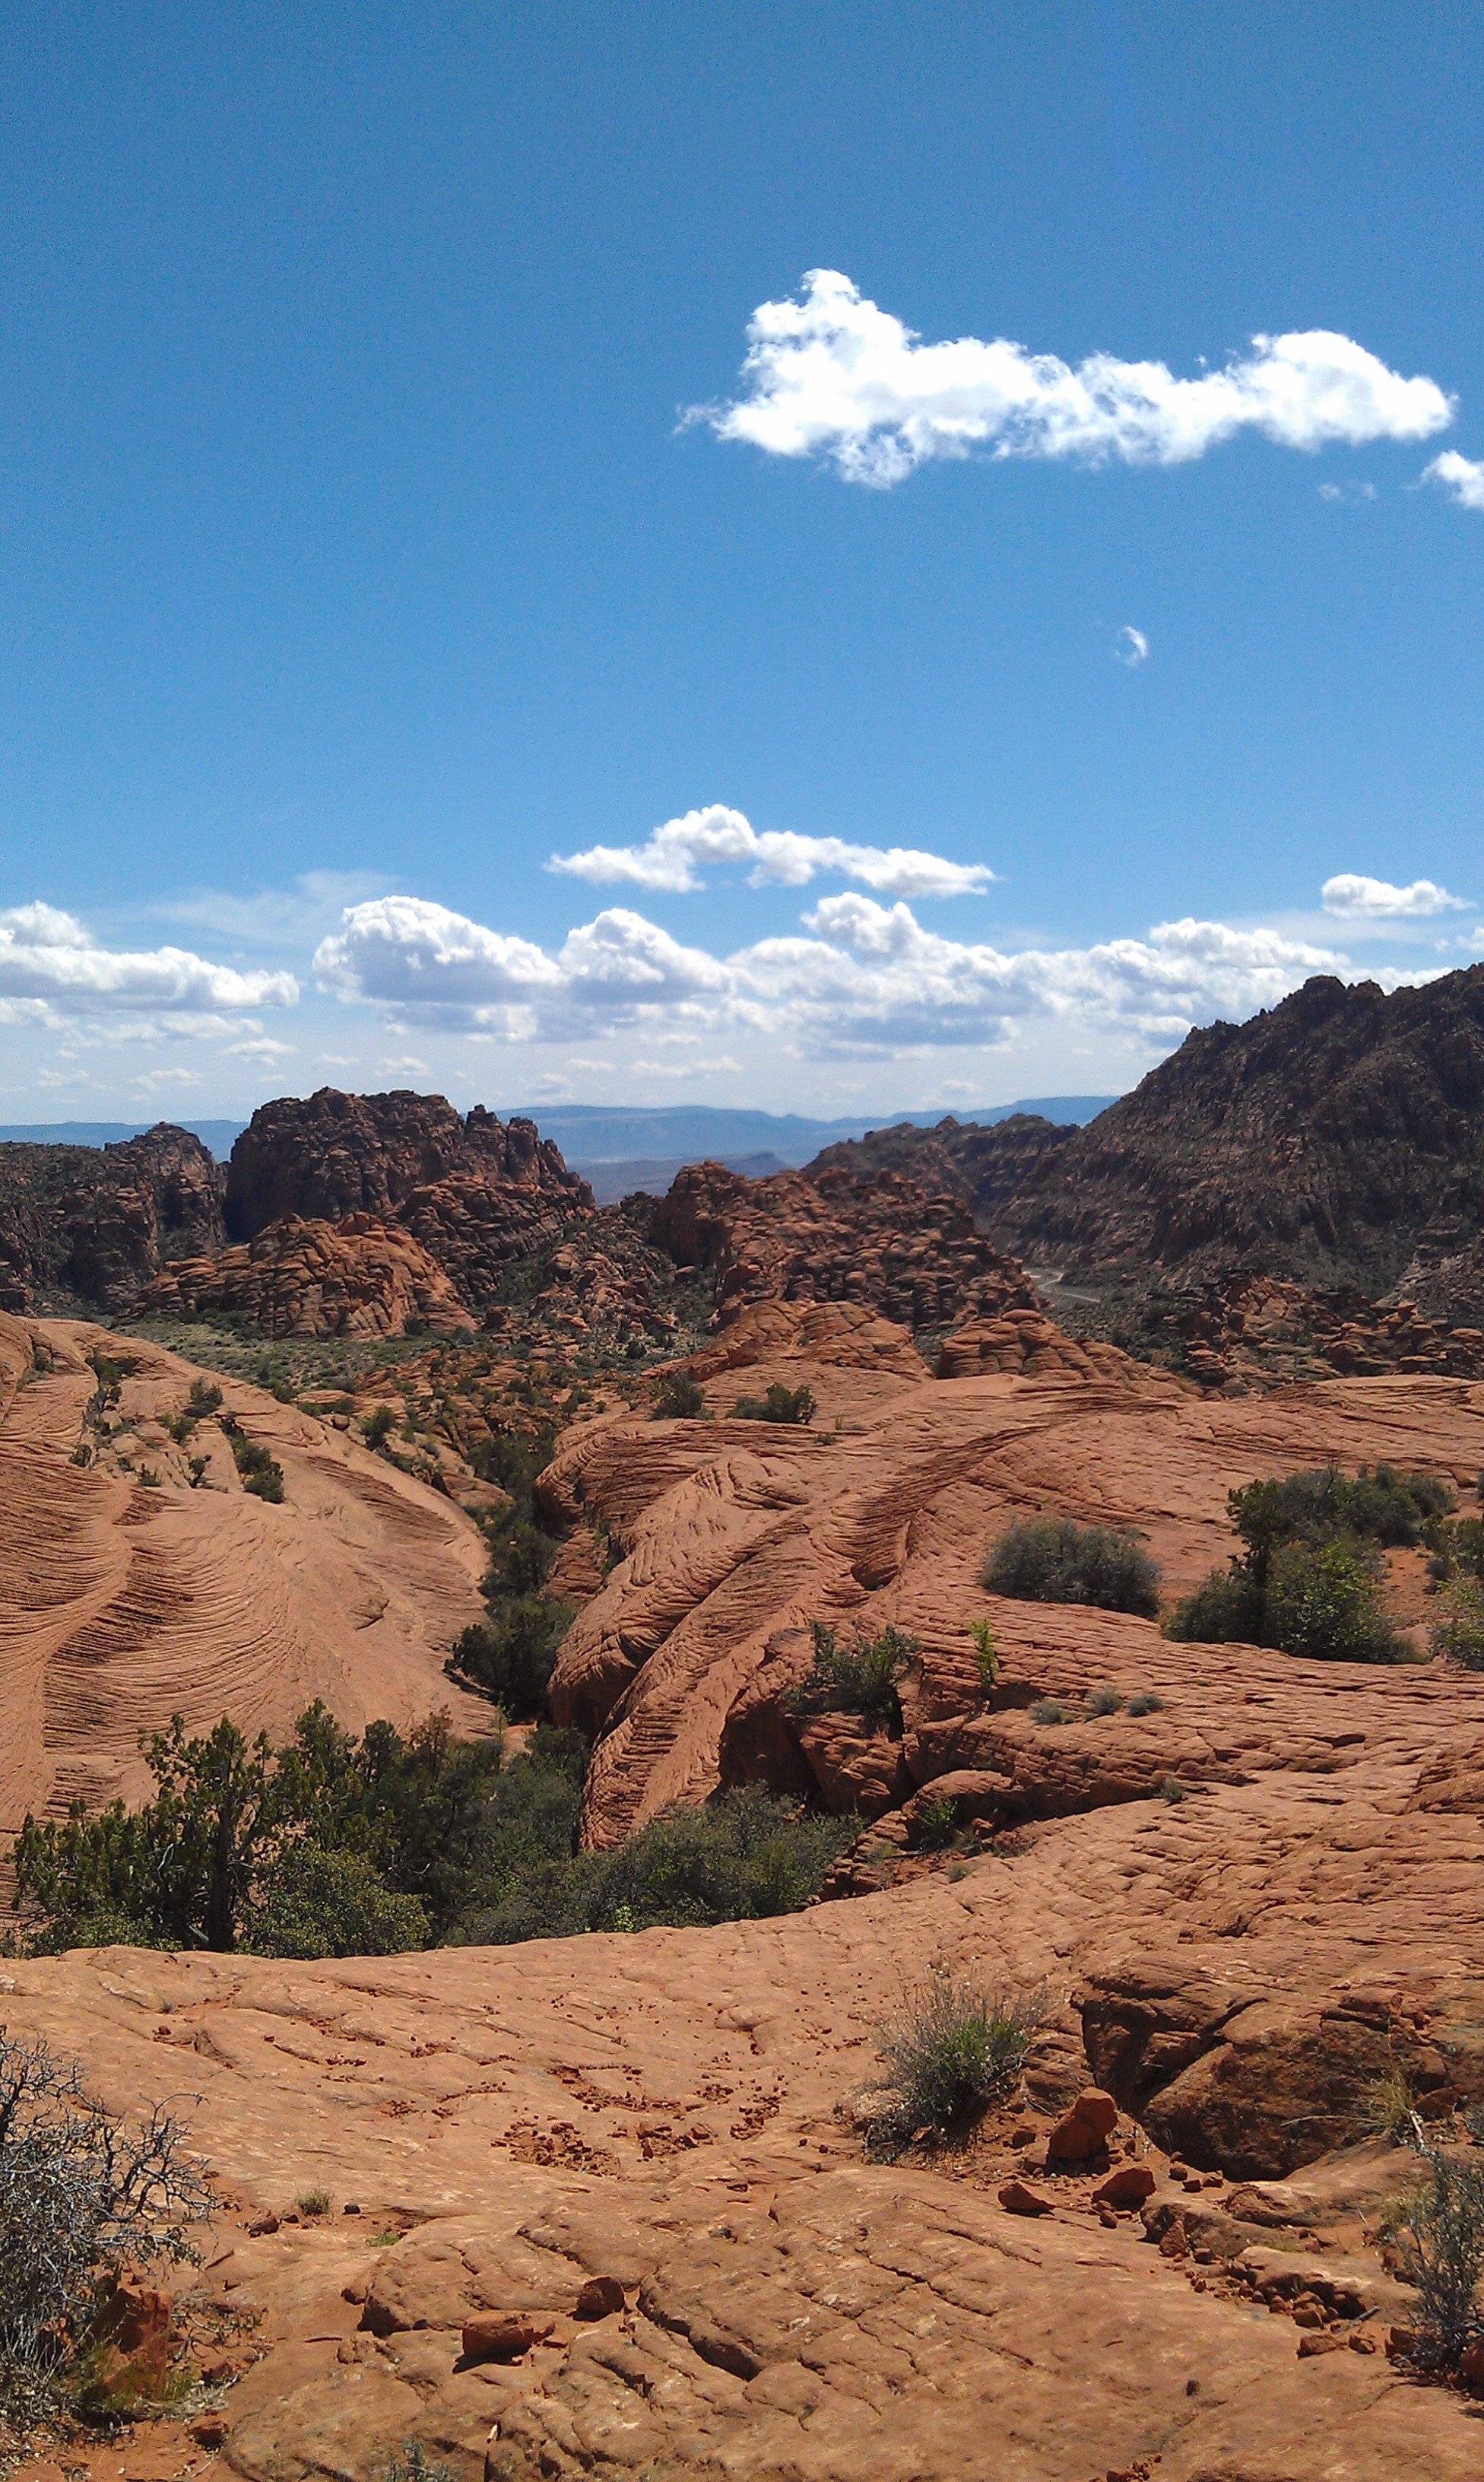 Utah Water Images | Free Photos, PNG Stickers, Wallpapers & Backgrounds -  rawpixel